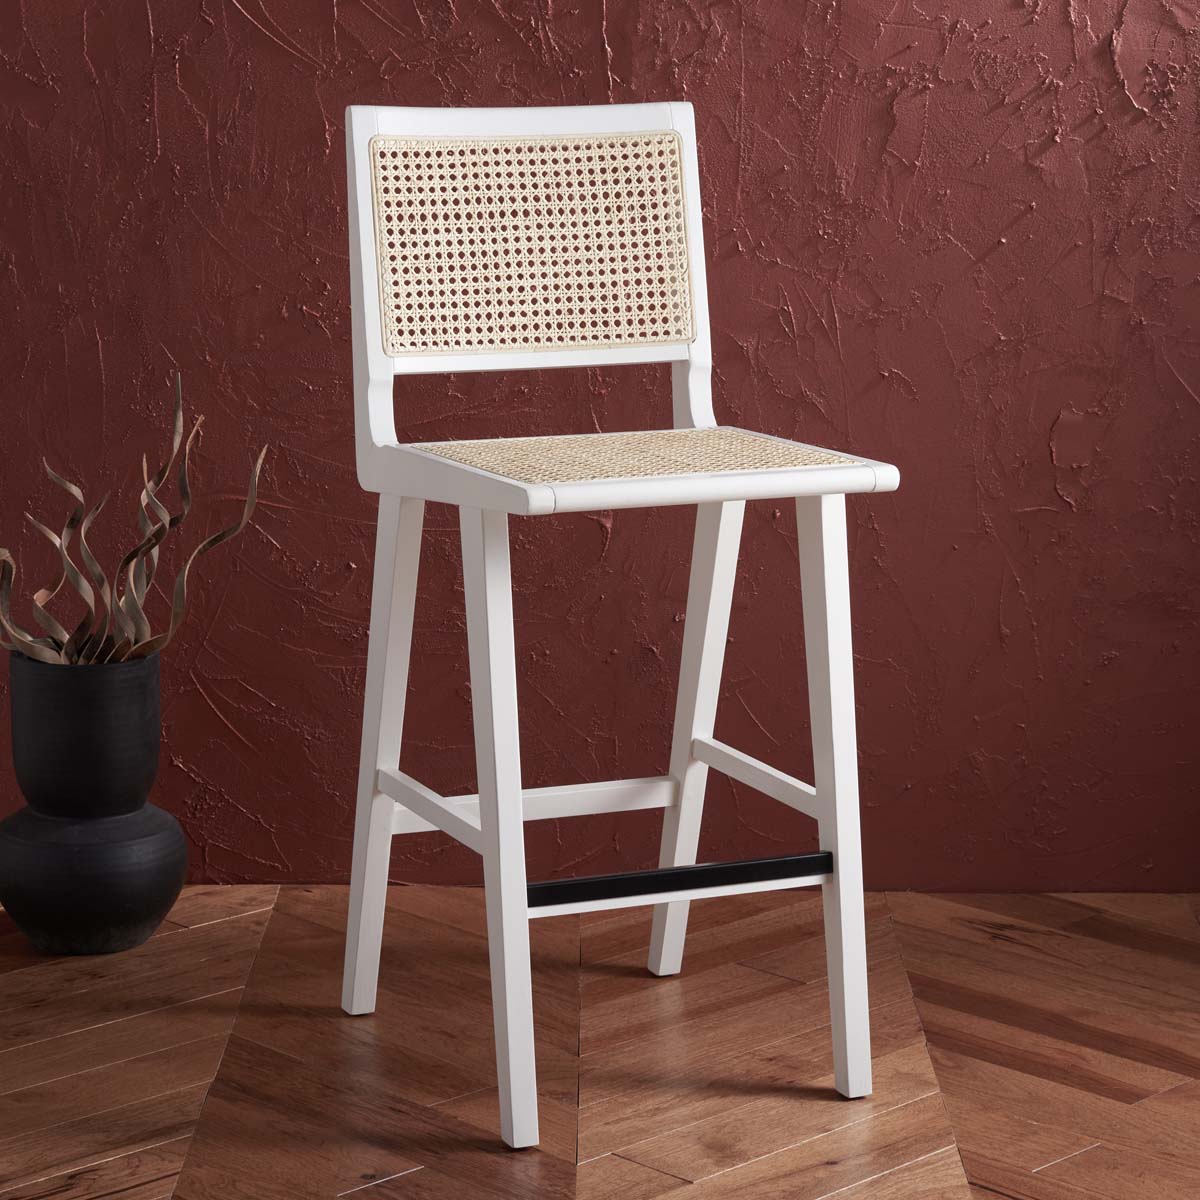 Safavieh Couture Hattie French Cane Barstool - White / Natural